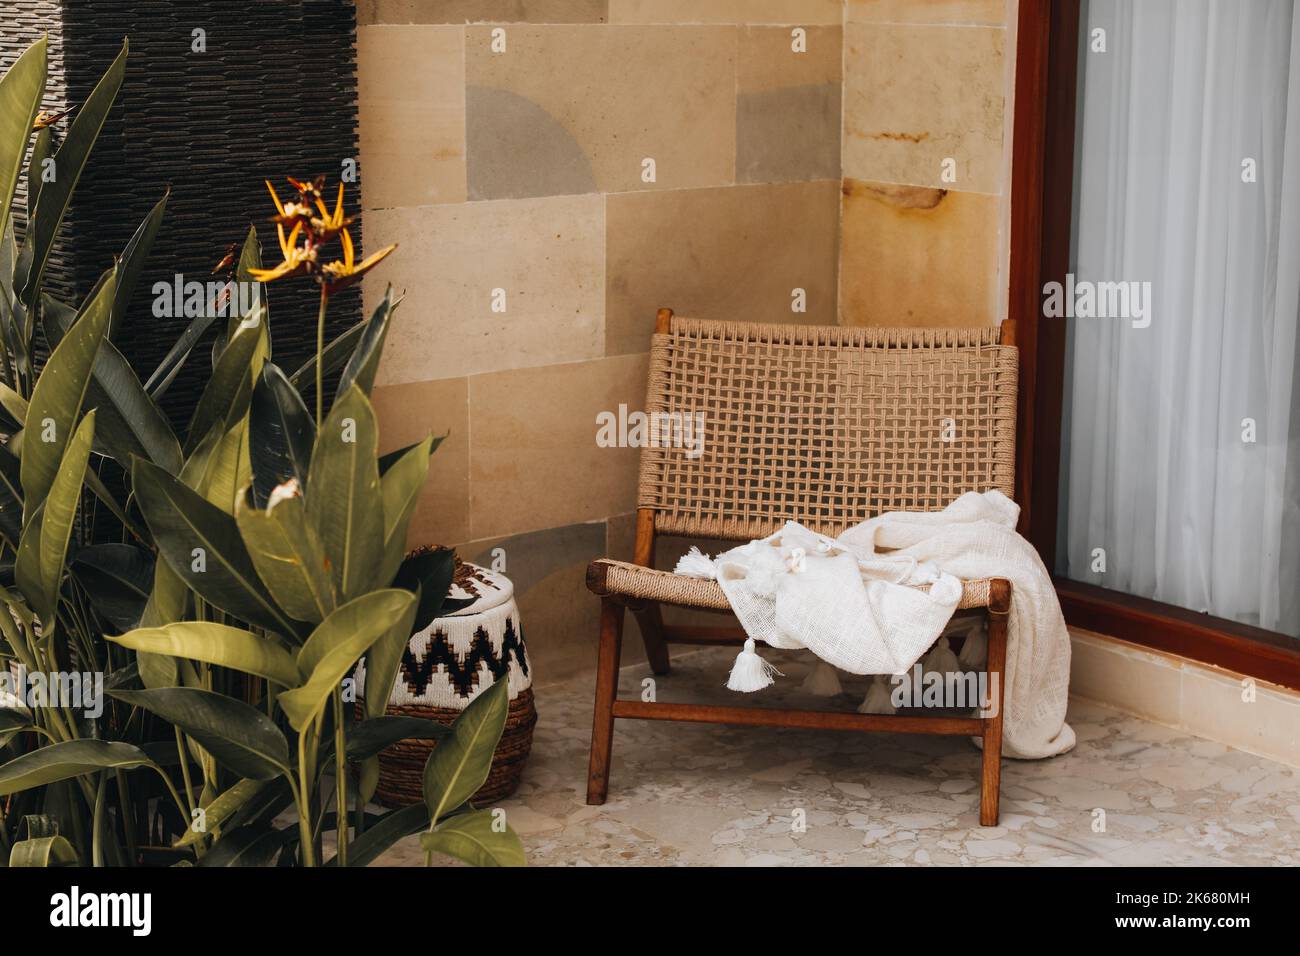 Wicker chair with a white blanket on the summer veranda. Balinese style home decor Stock Photo